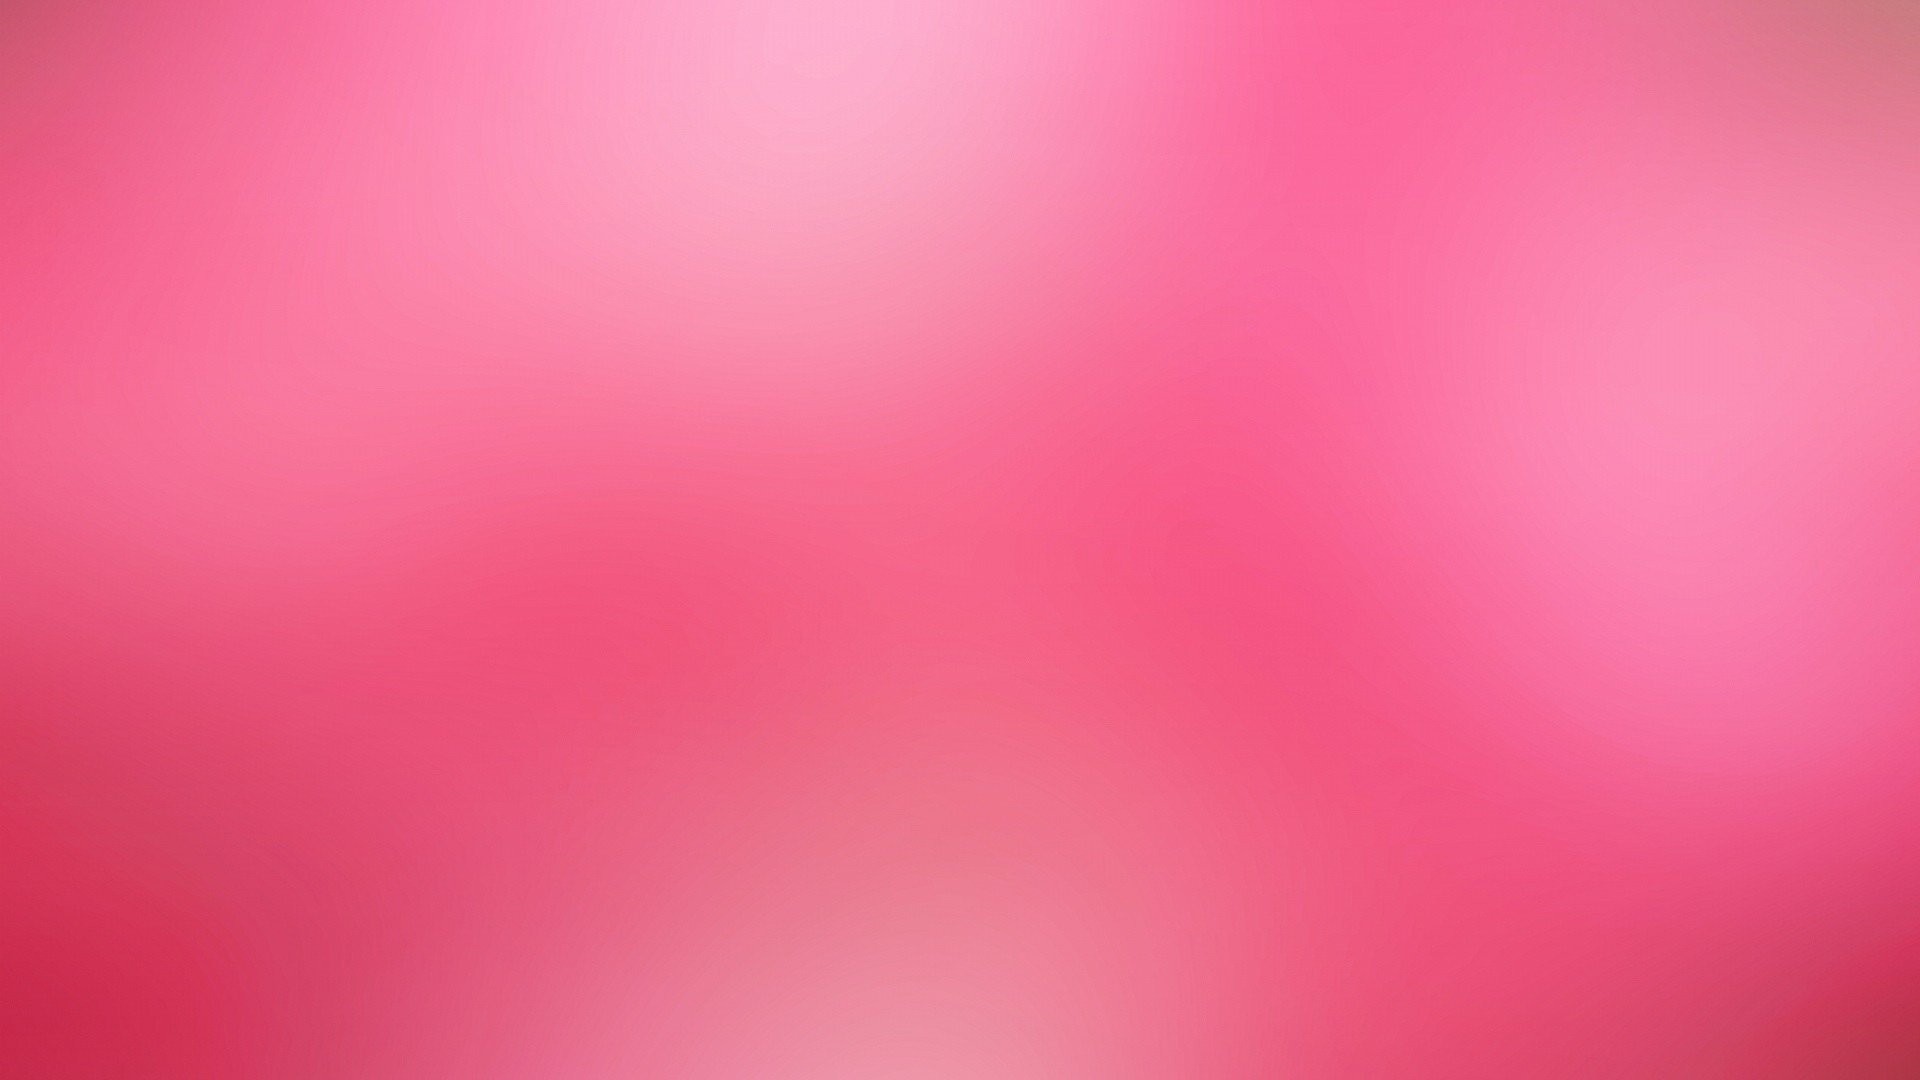 Abstract Pink Design Background Wallpaper 